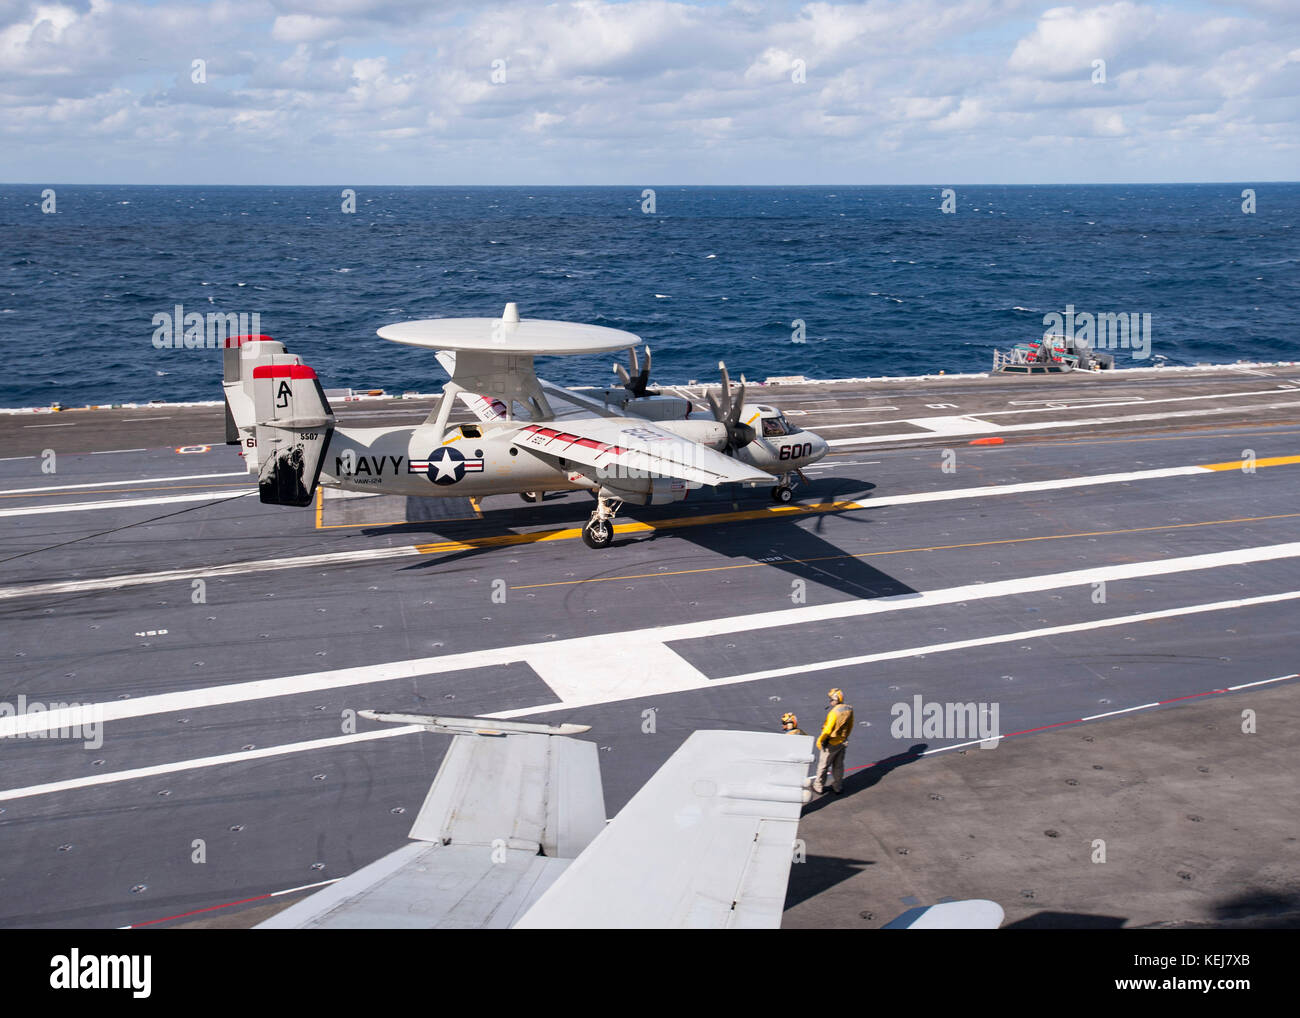 Landing on Aircraft Carrier Stock Photo